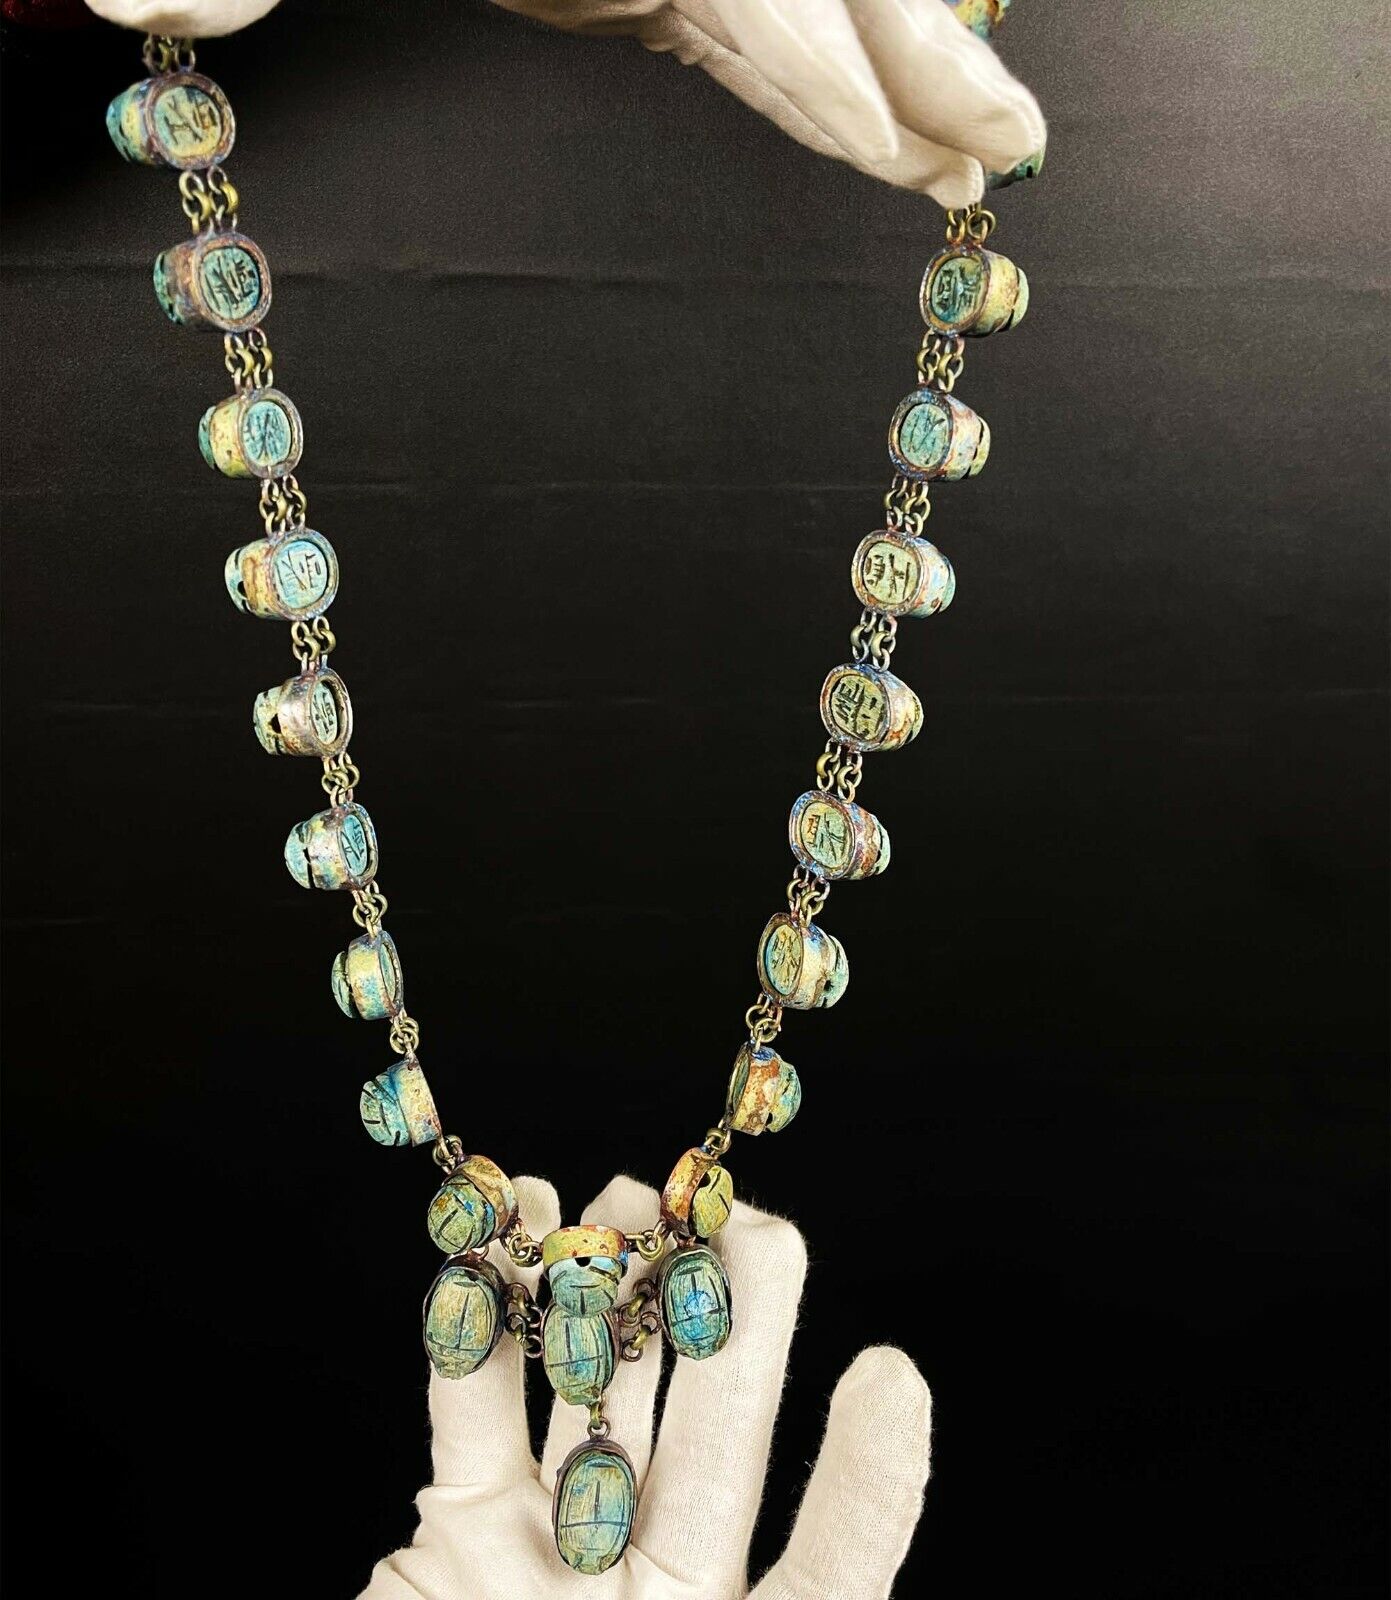 Unique Egyptian Jewelry necklace of the Egyptian Scarab